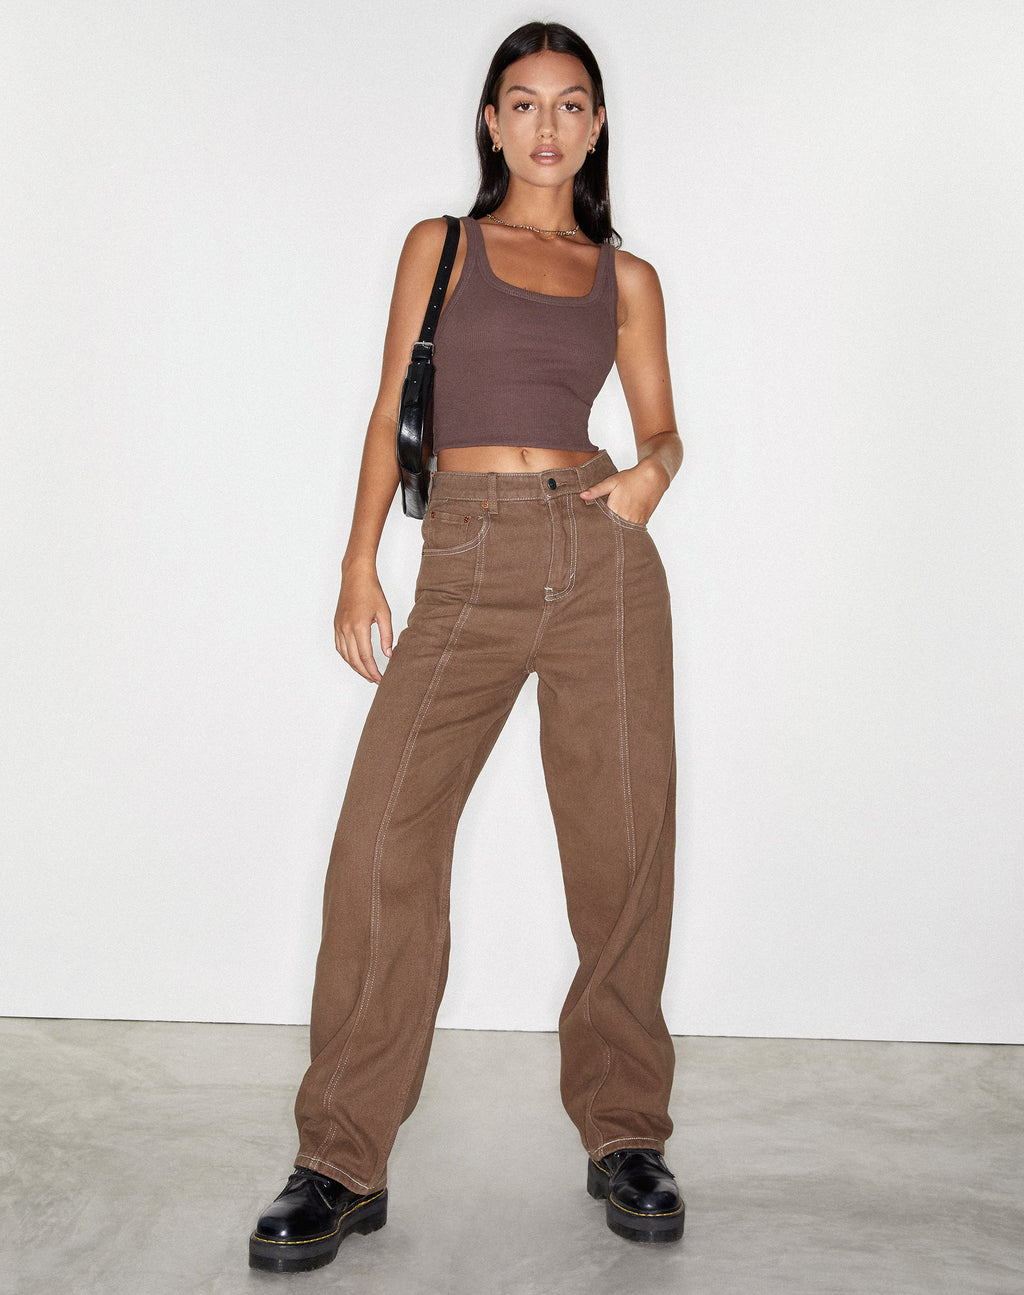 Seam Parallel Jeans in Rich Brown